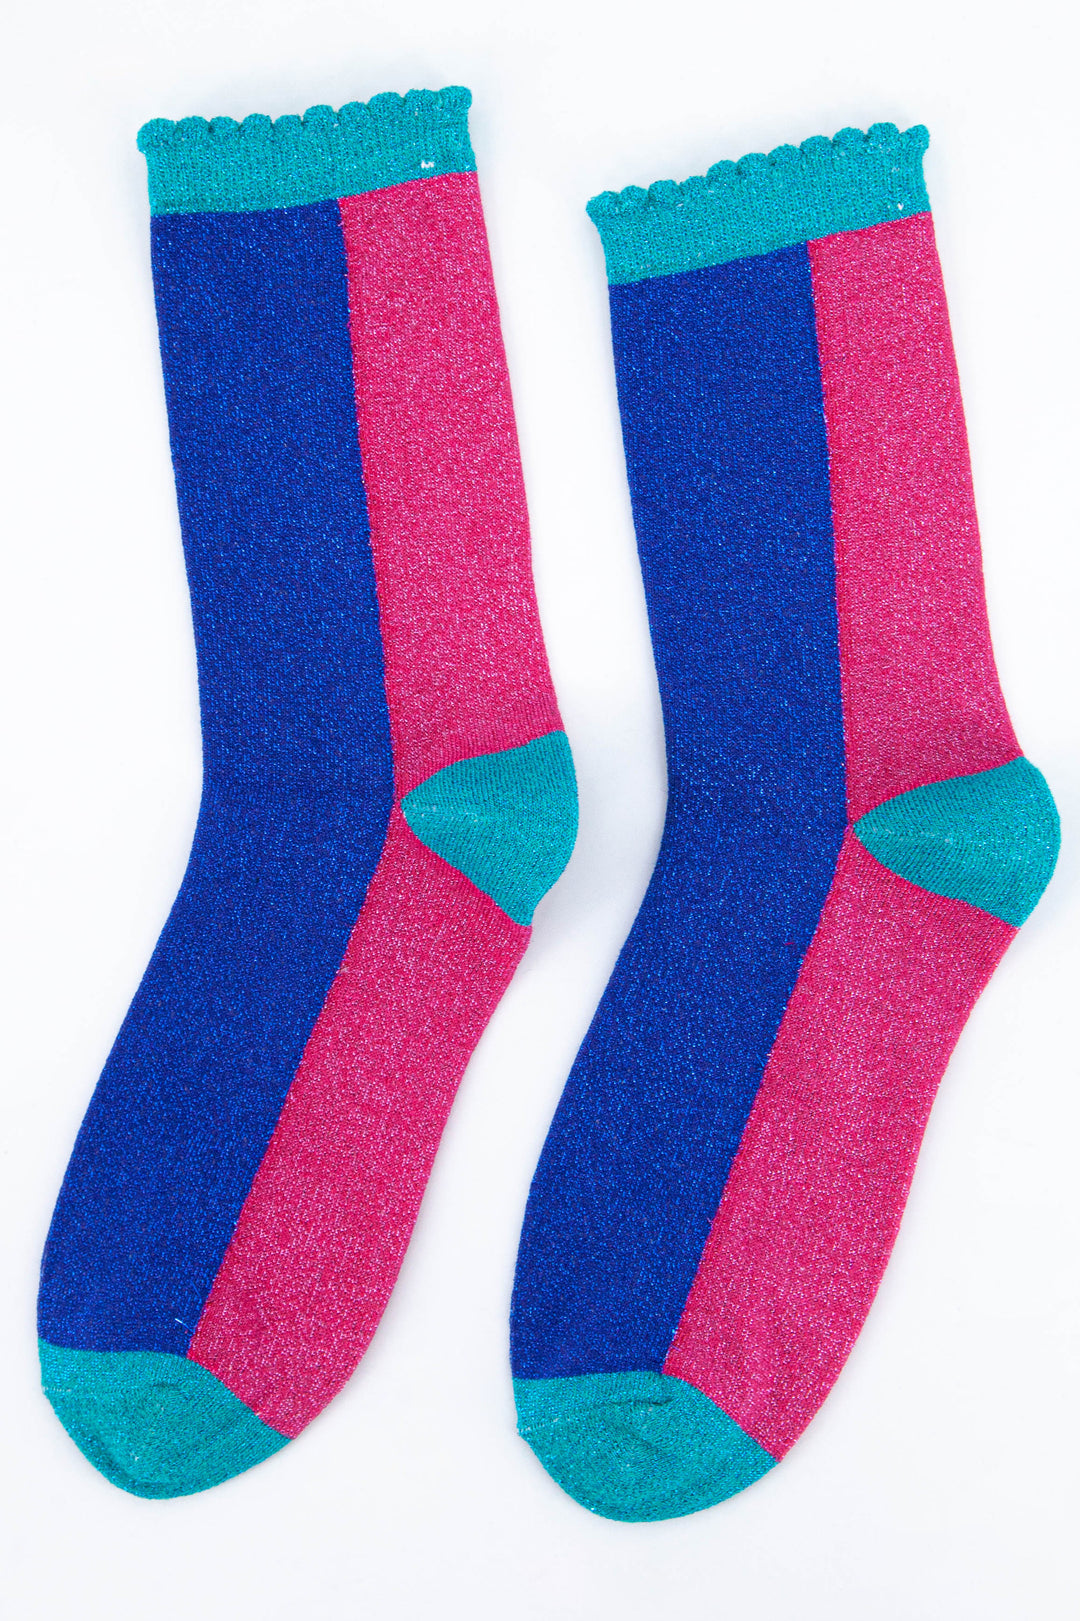 blue and pink sparkly ankle socks with scalloped edges